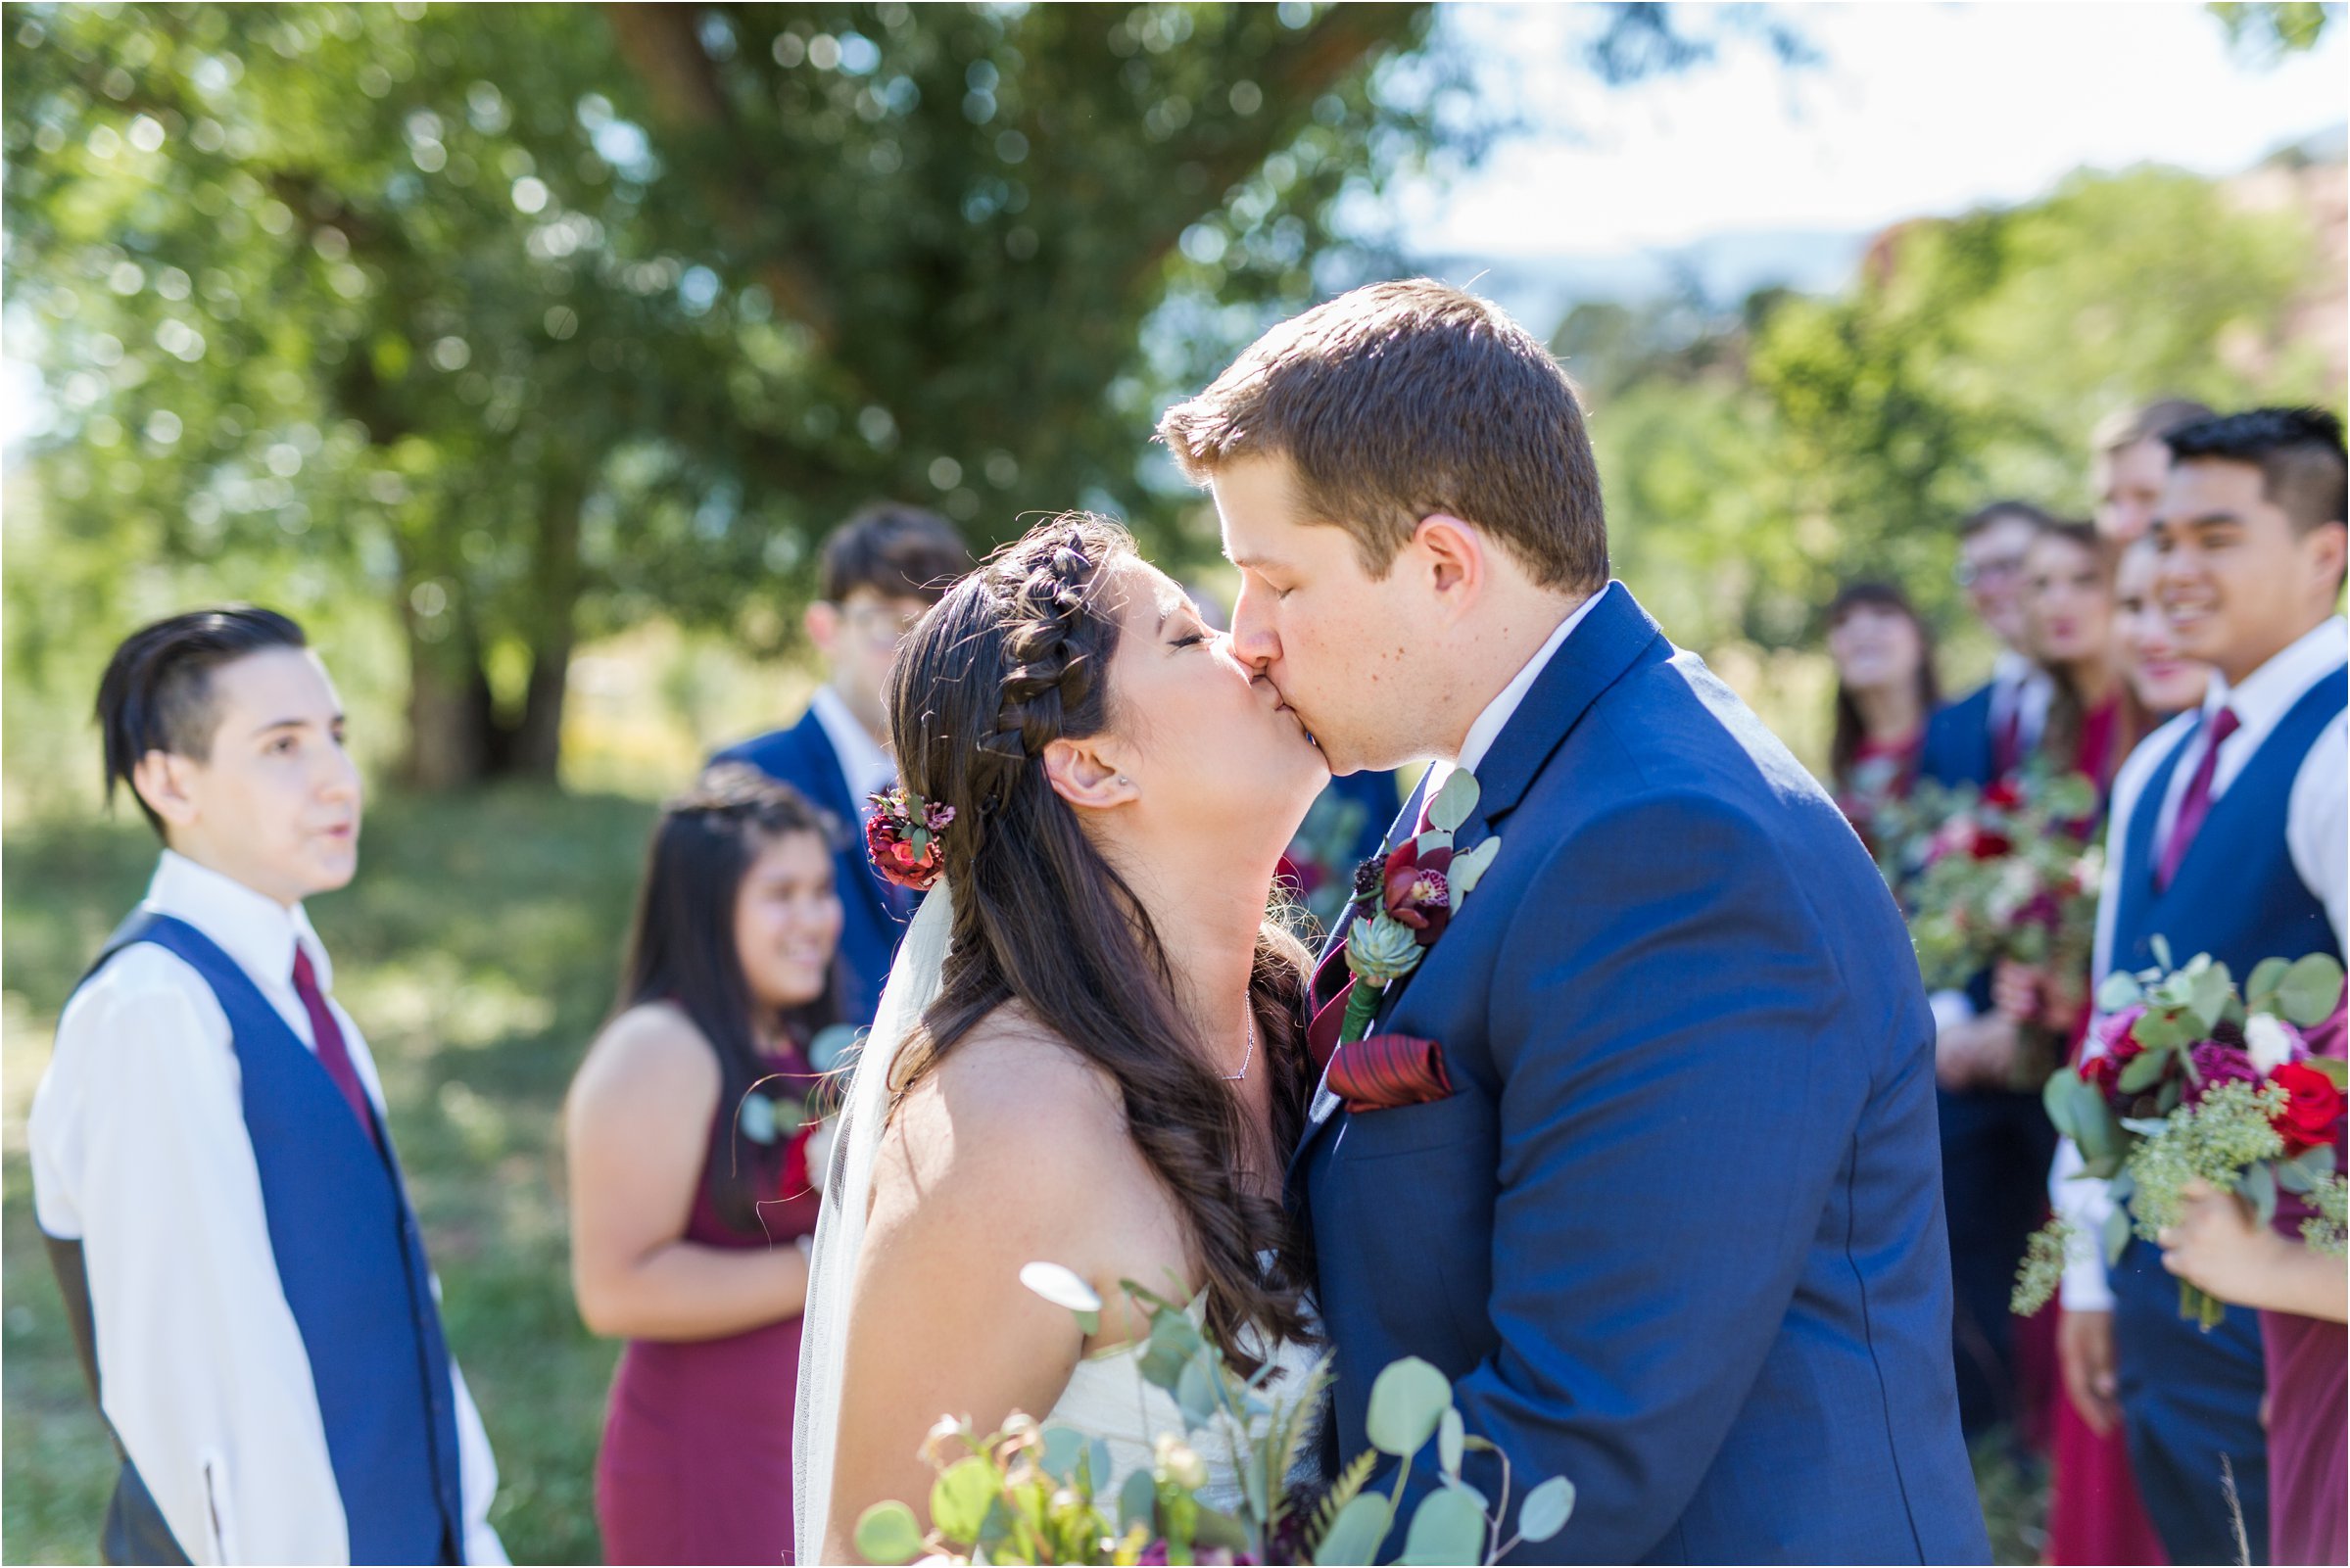 bride and groom kiss together in front of bridal wedding party before ceremony